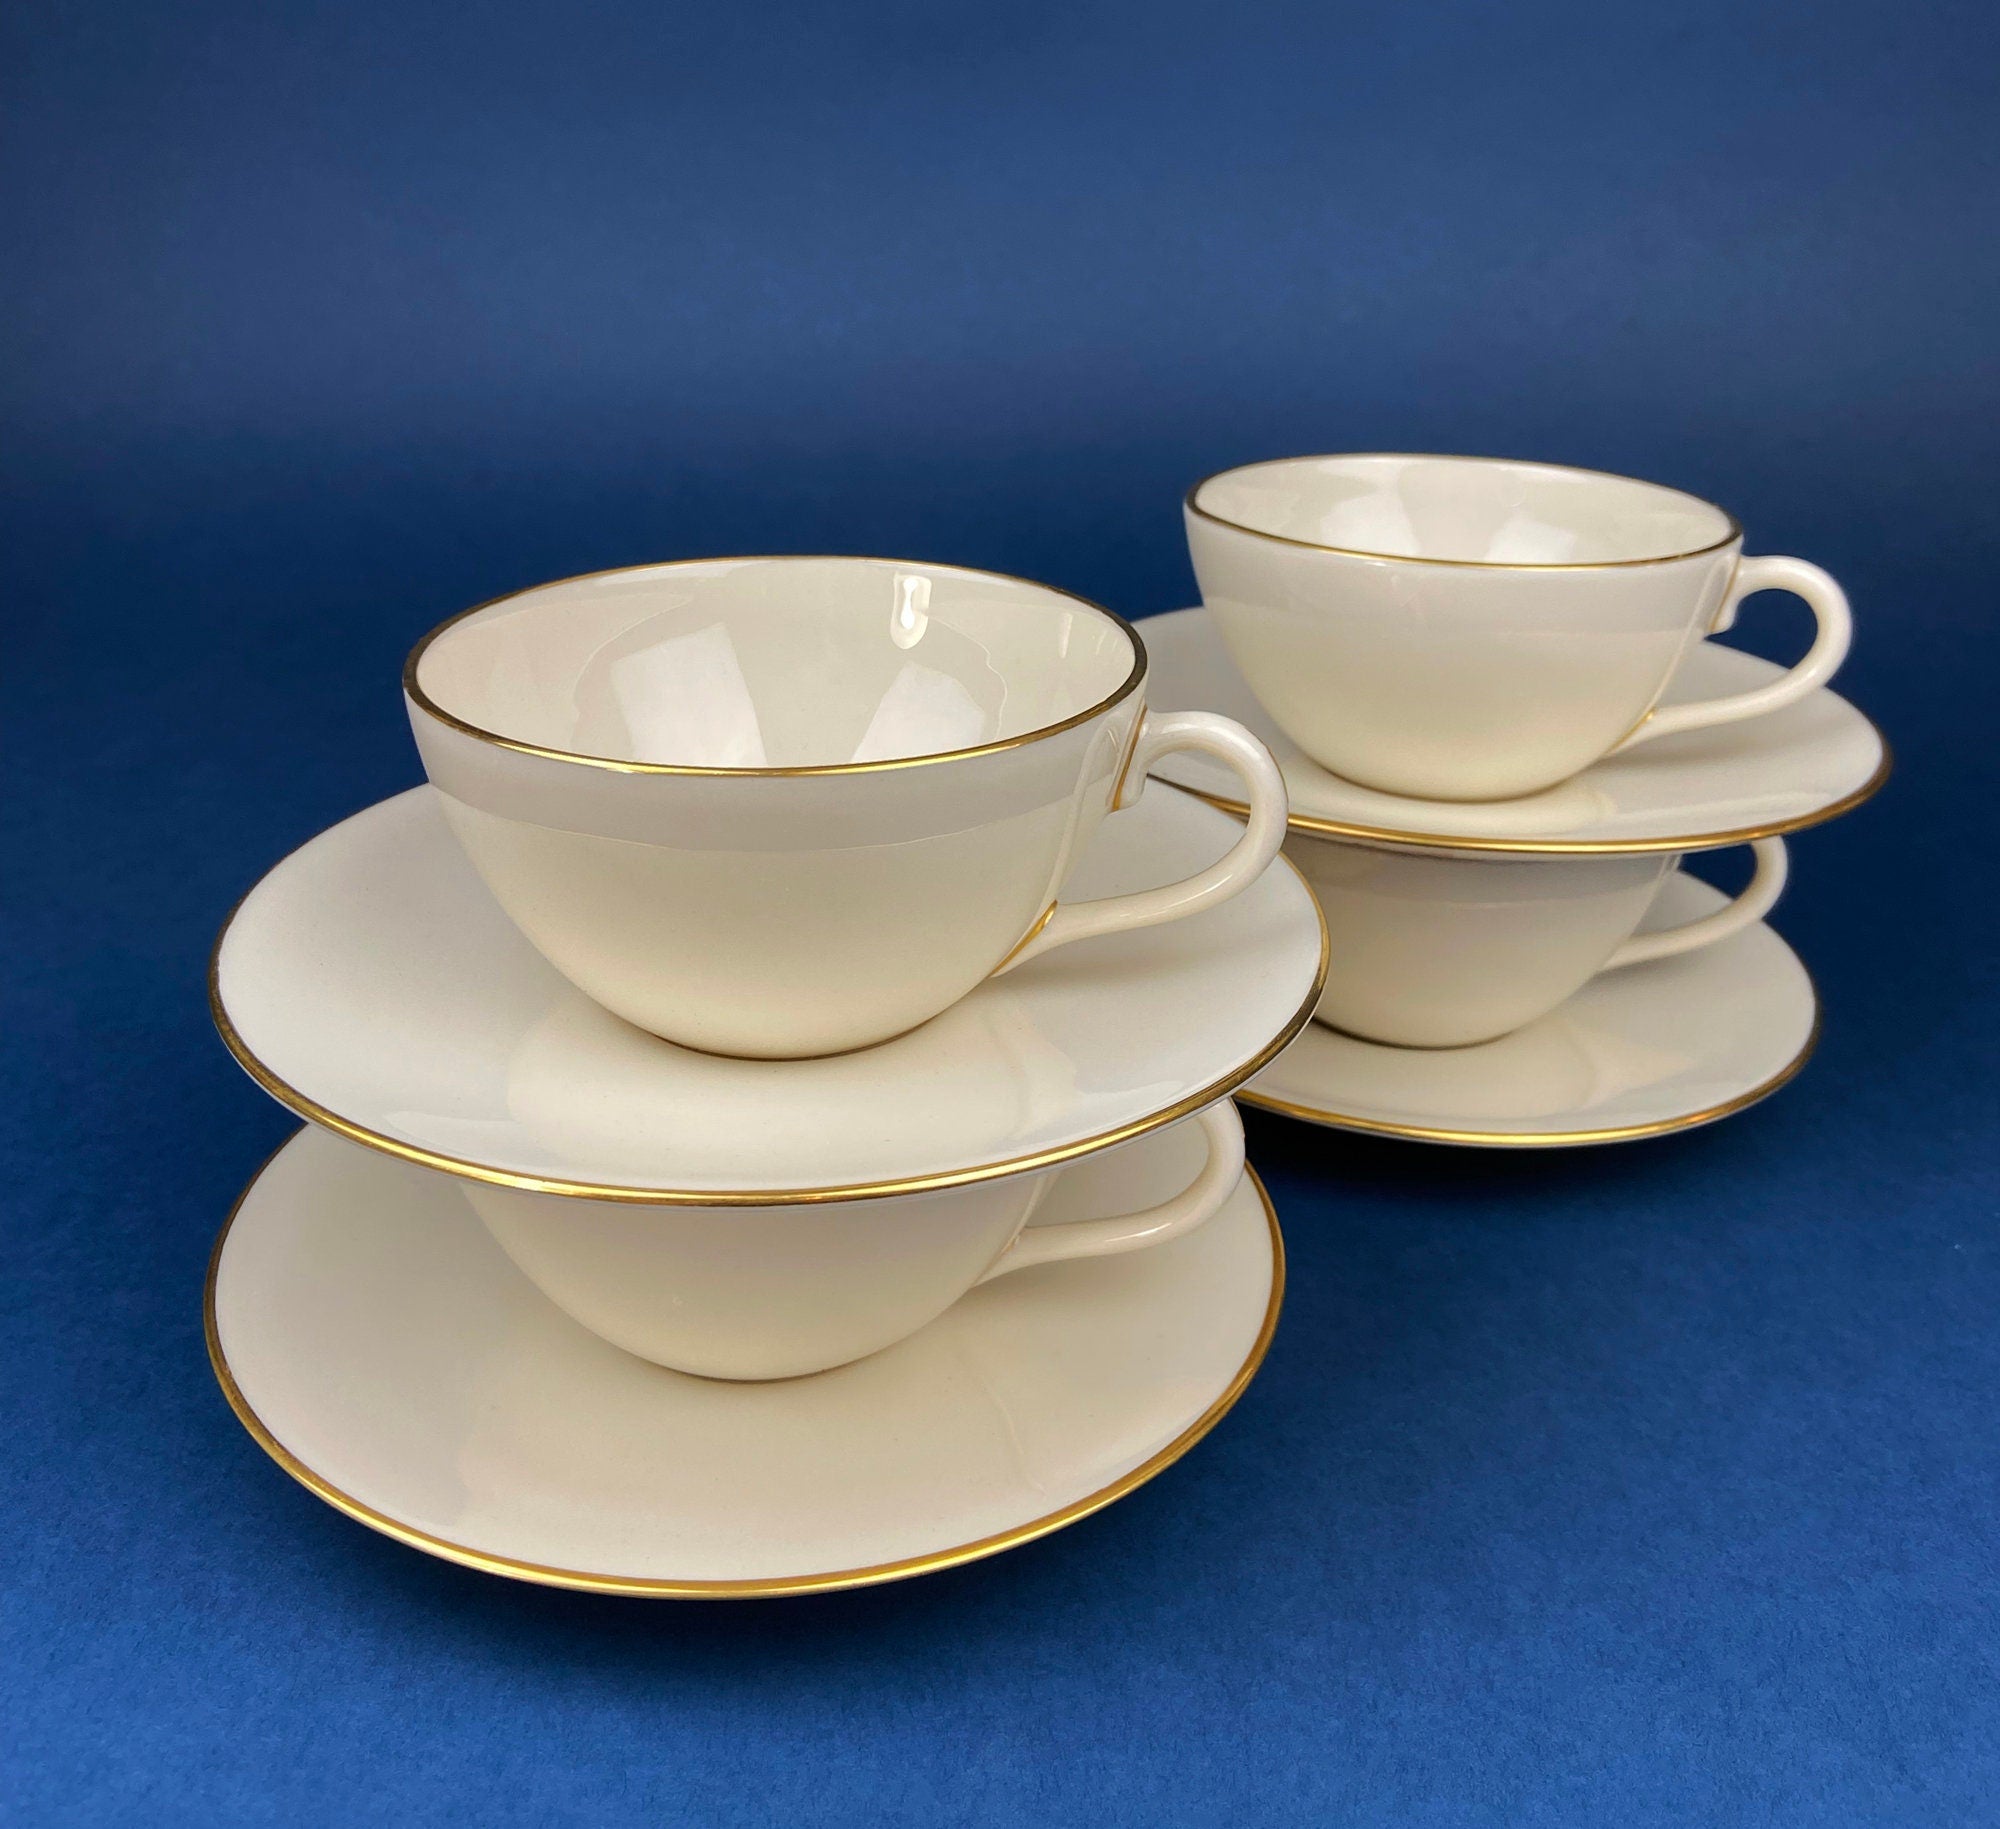 Spin White Porcelain Cup And Saucer Duo Set Of 4 - World Market